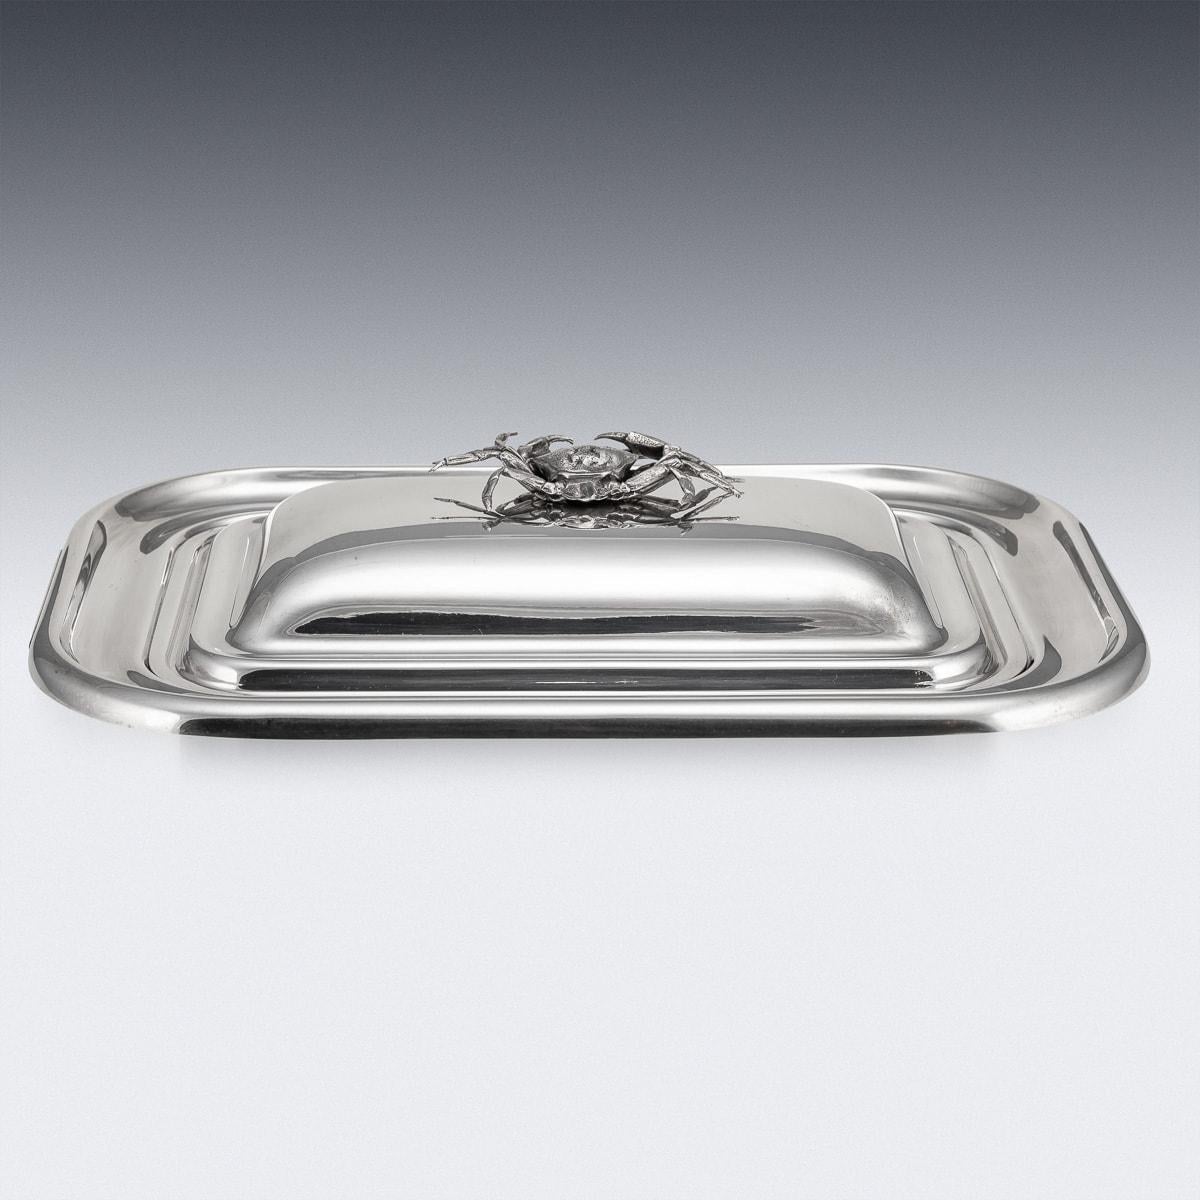 Unusual mid-20th Century Italian rectangular silver plated serving dish with a crab shaped handled cloche.

CONDITION
In Great Condition - No Damage.

SIZE
Height: 8cm
Width: 45 x 33cm